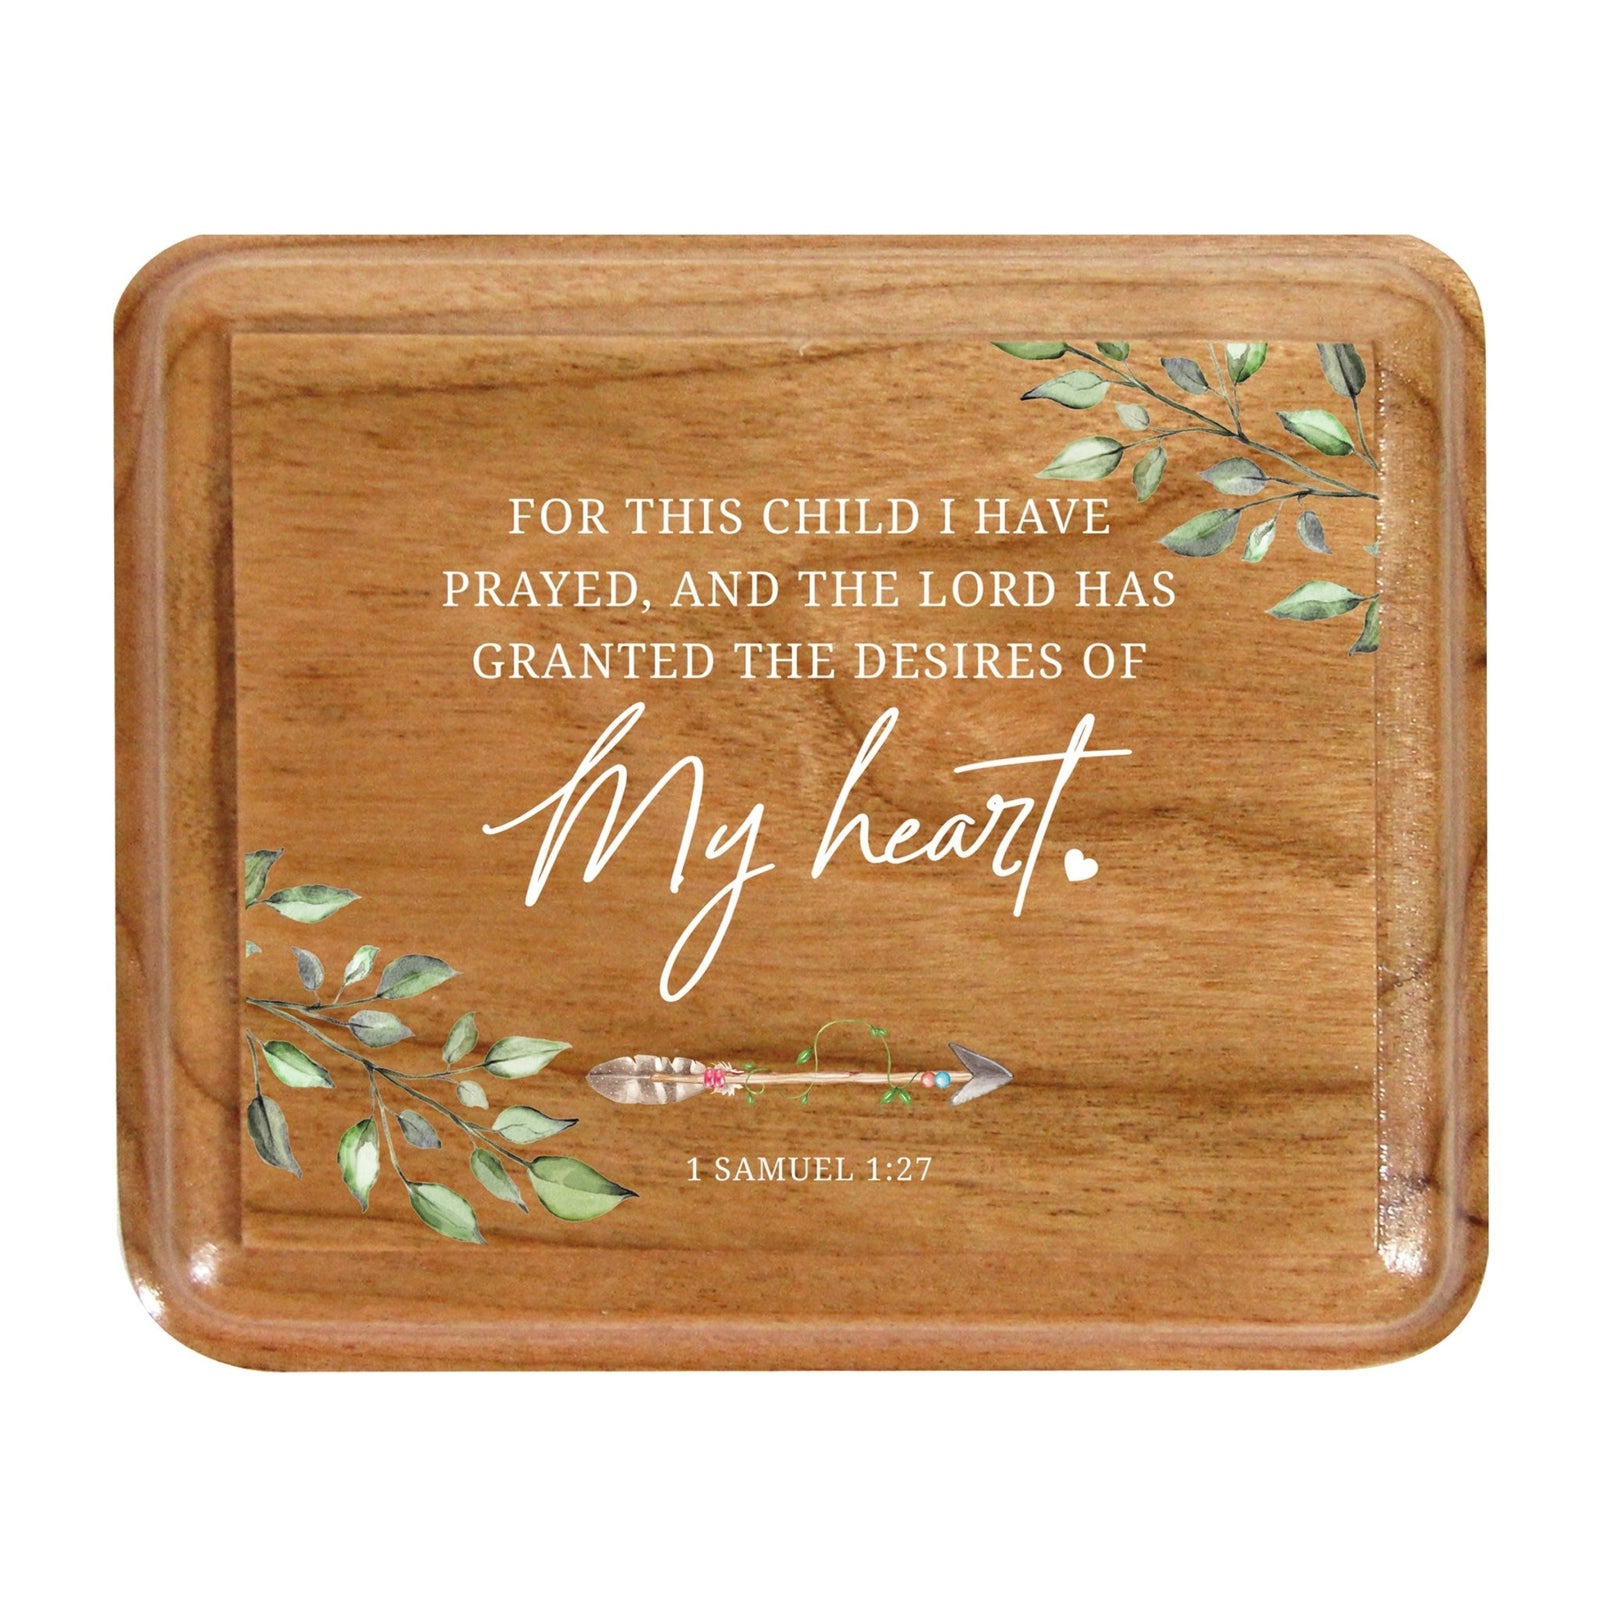 Modern Keepsake Box with Inspirational Quotes 3.5x3 For This Child - LifeSong Milestones